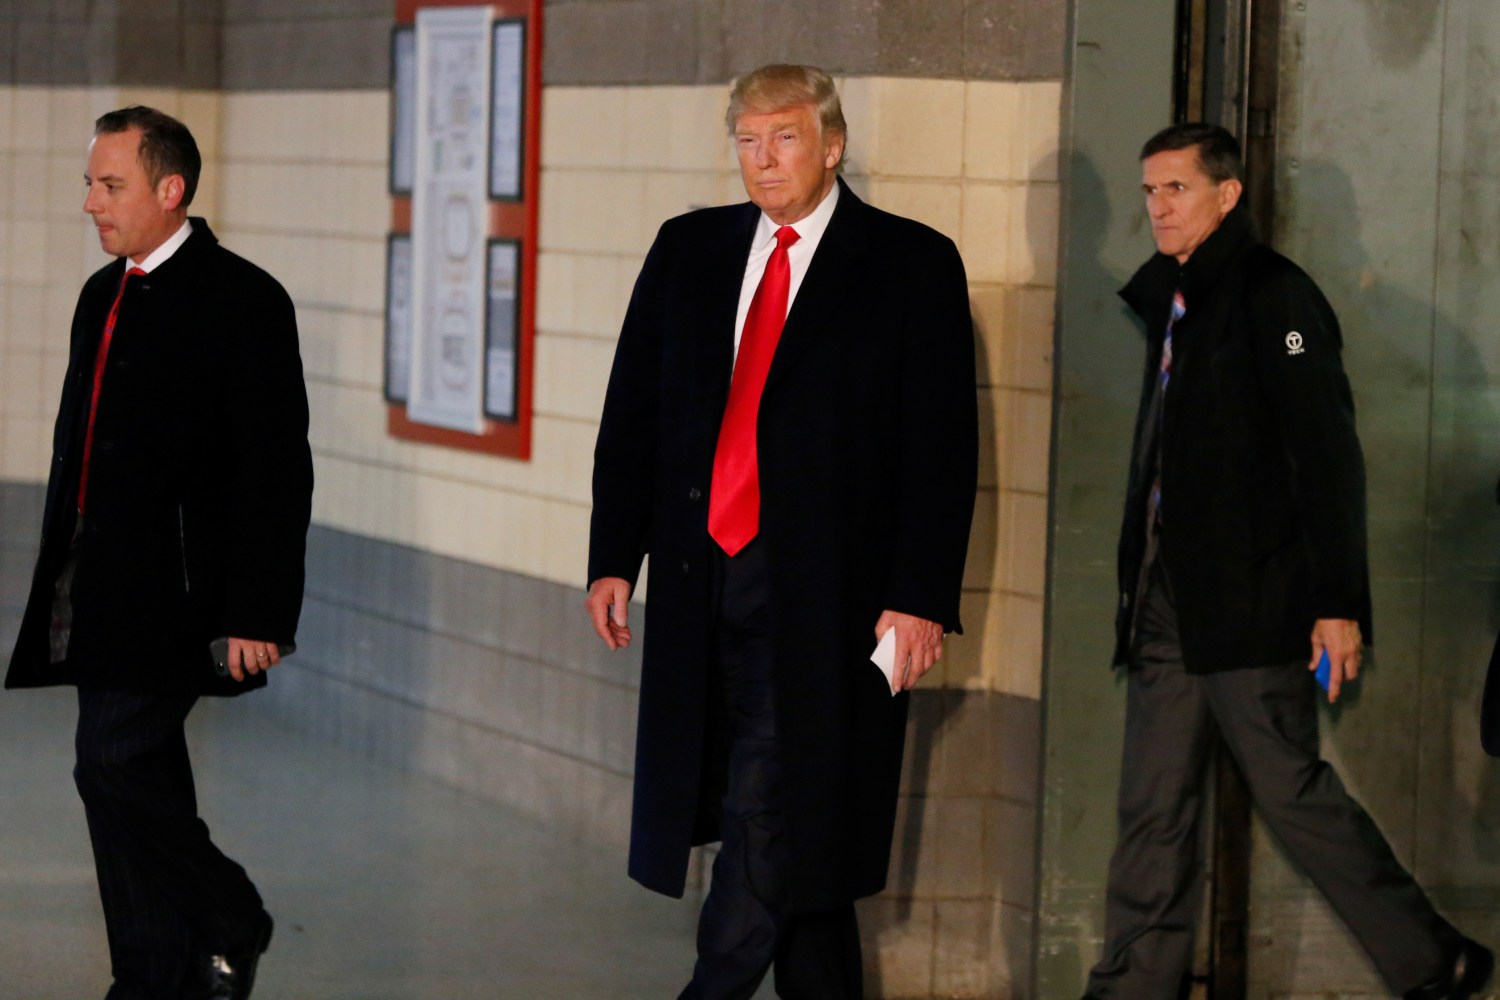 U.S. President-elect Donald Trump leaves an elevator with Reince Priebus (L) and retired U.S. Army Lieutenant General Michael Flynn before speaking with the media about meeting with families of the victims of the November 28 attacks at Ohio State University, in The Jerome Schottenstein Center in Columbus, Ohio, U.S., December 8, 2016. REUTERS/Shannon Stapleton - RTSVBCK